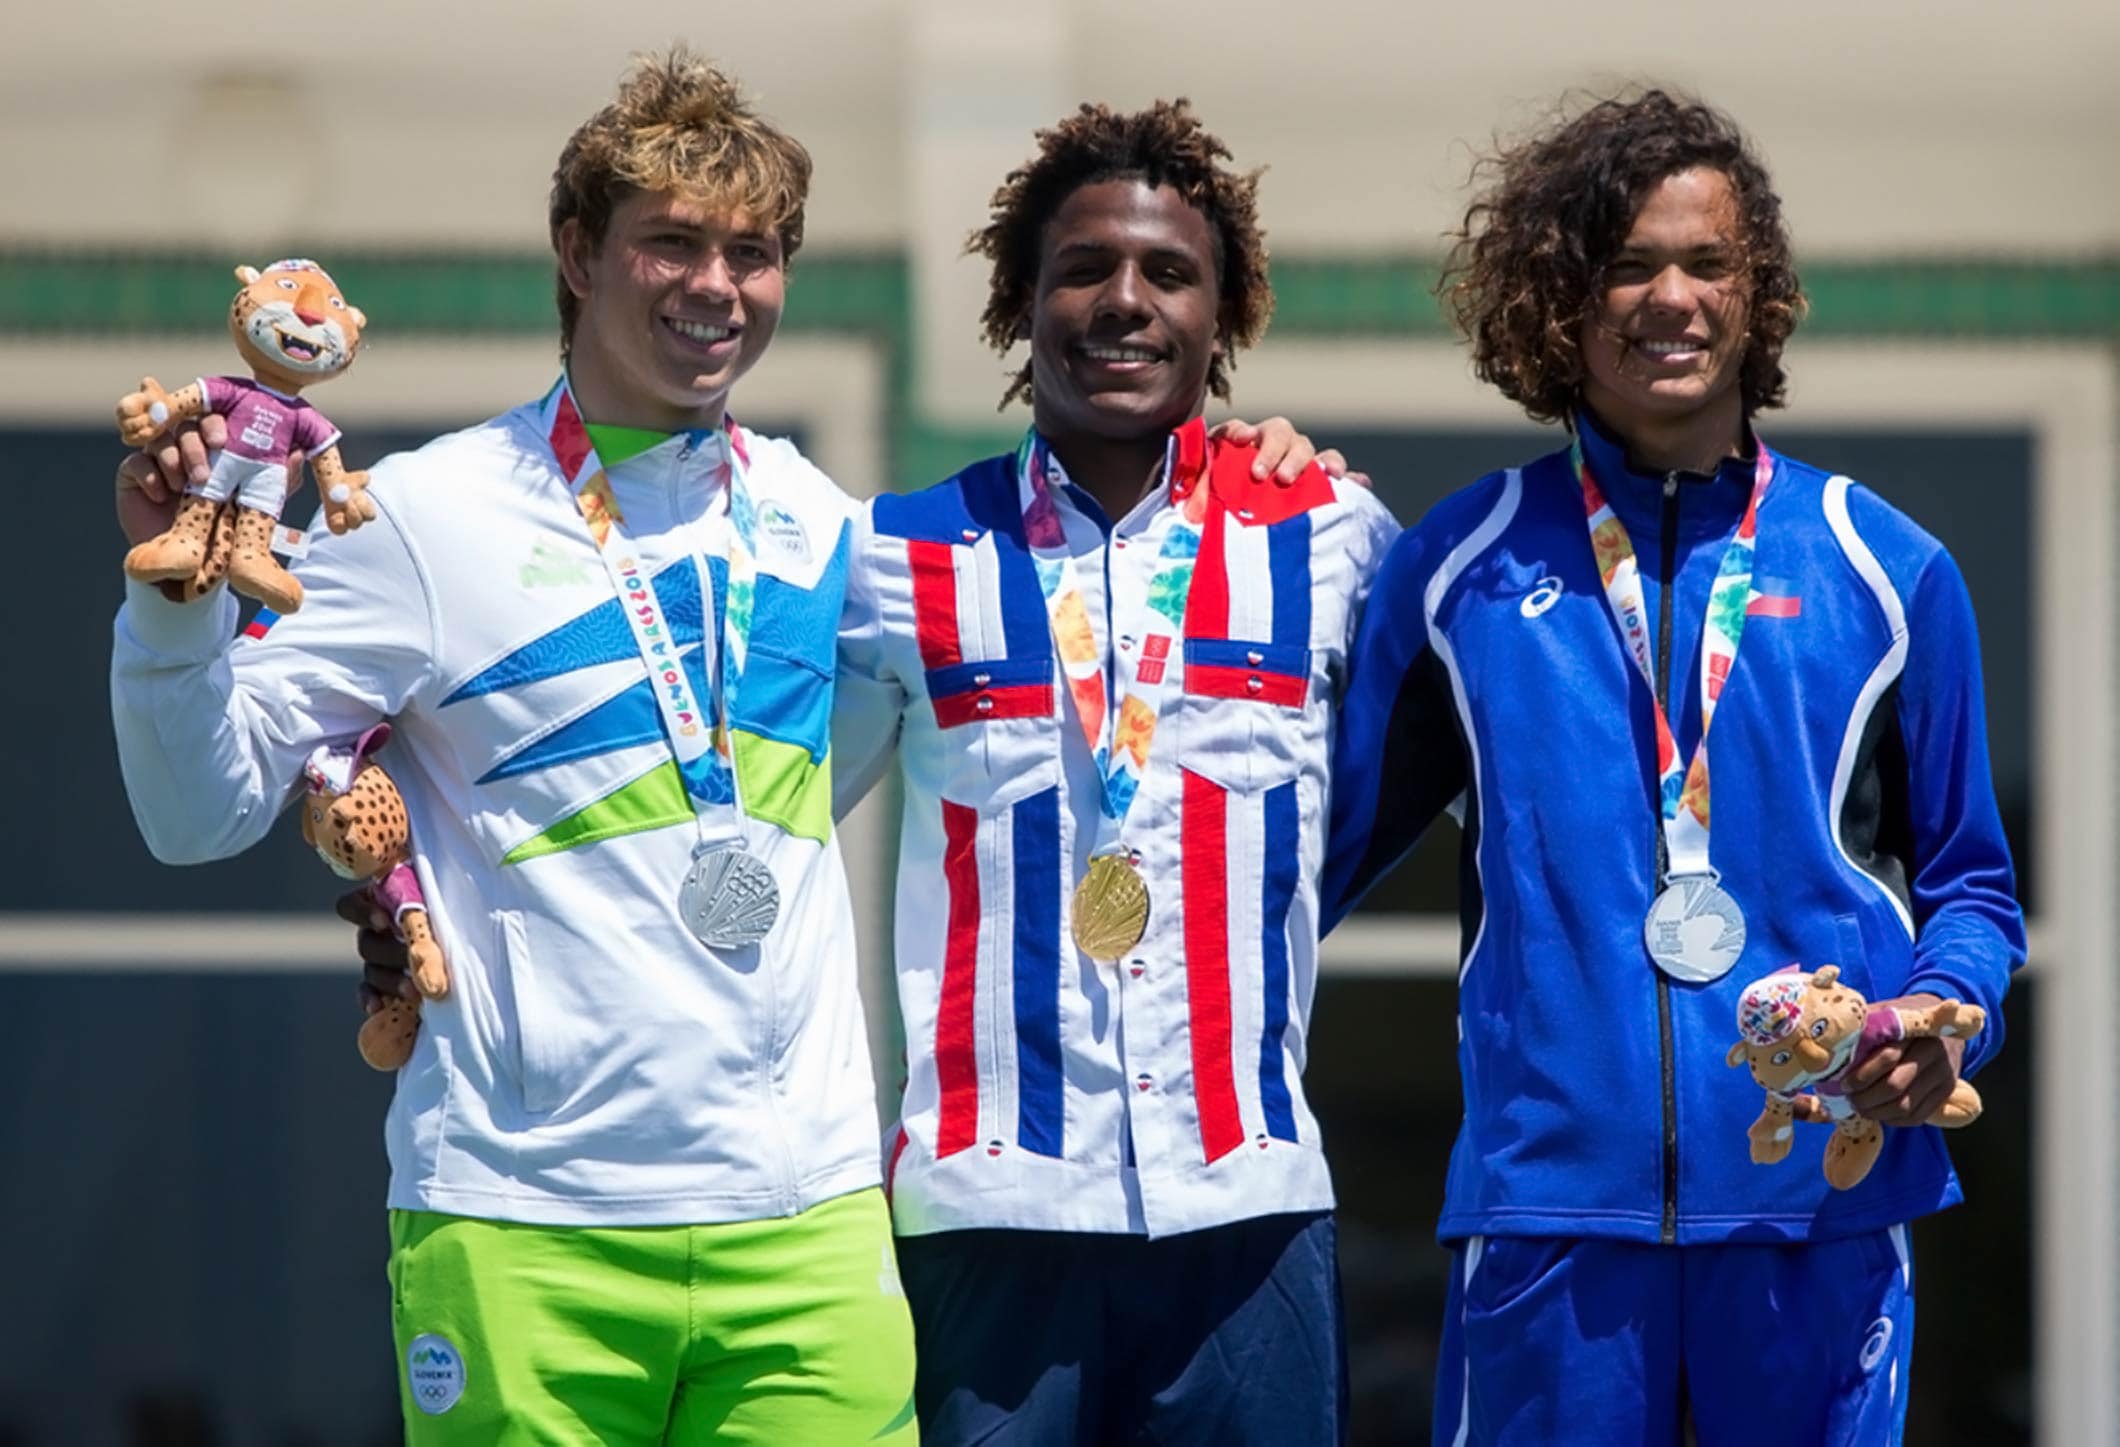 Men’s kiteboard champion Deury Corniel (DOM) is flanked by joint silver medallists Toni Vodisek (SLO, left) and Filipino Christian Tio (Gabriel Heusi for OIS/IOC)